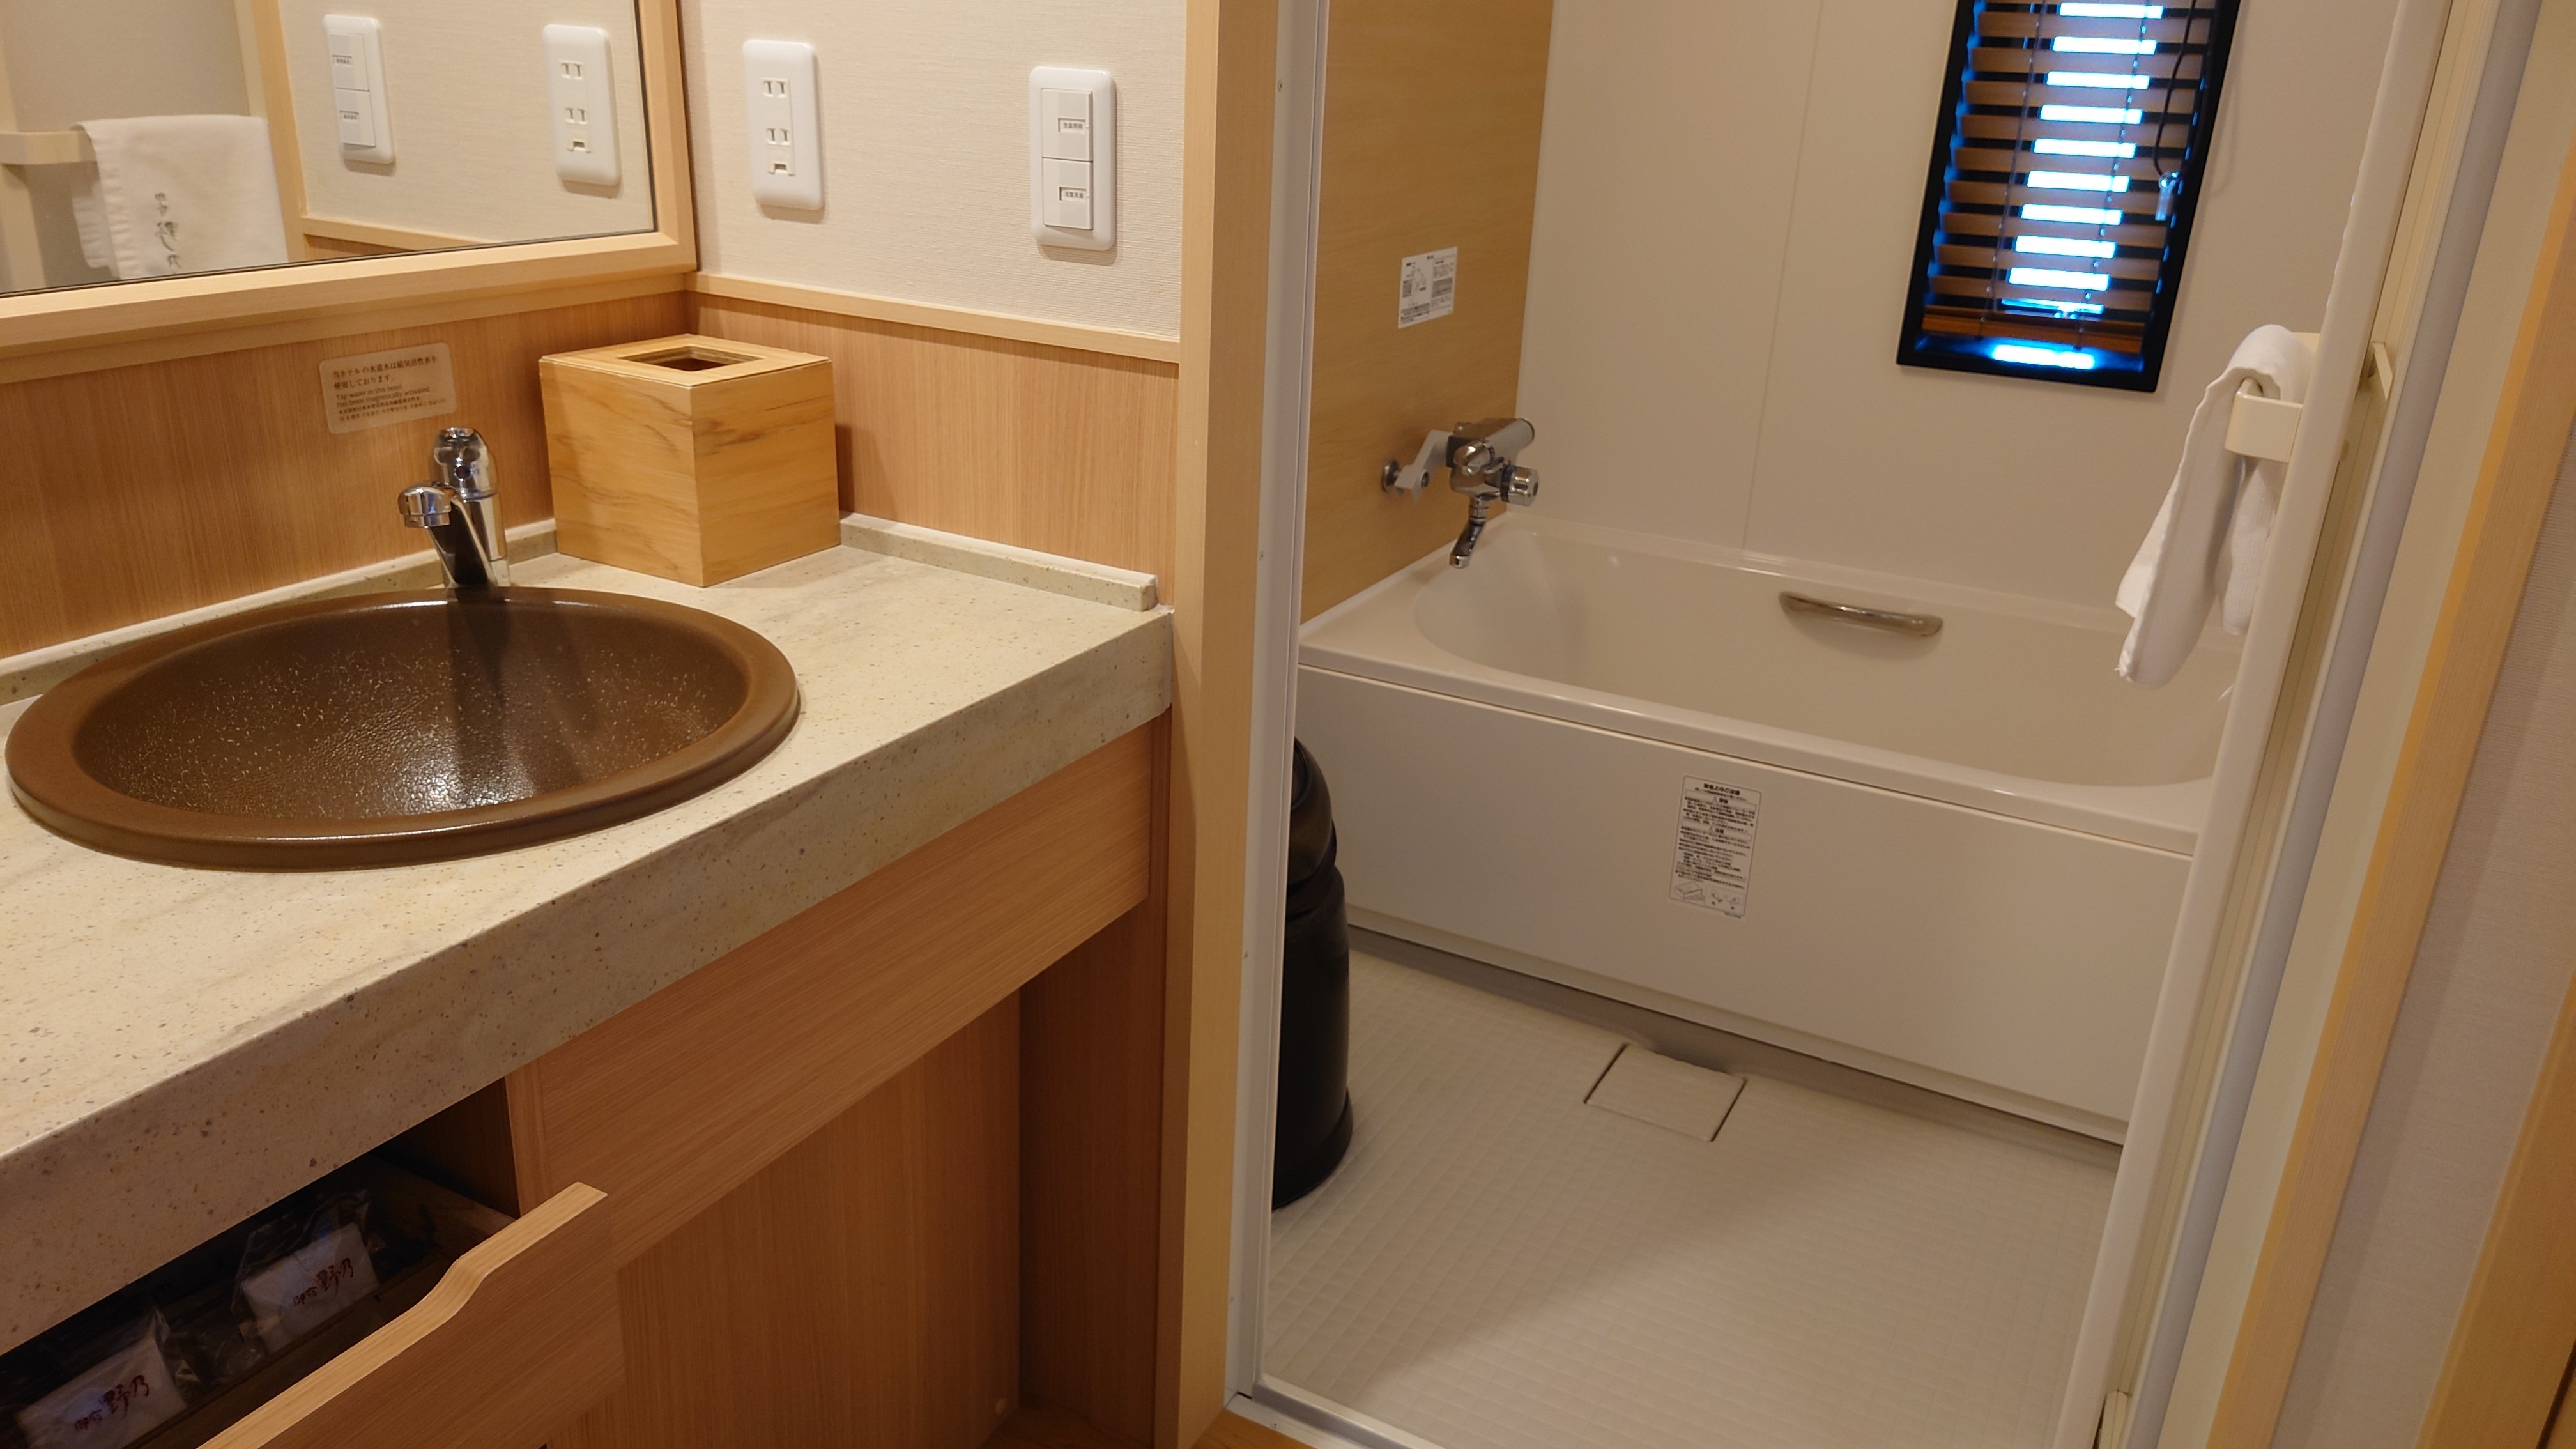 ■ Moderate twin bathroom (24.75㎡ 110cm & times; 200cm & times; 2 Serta beds)